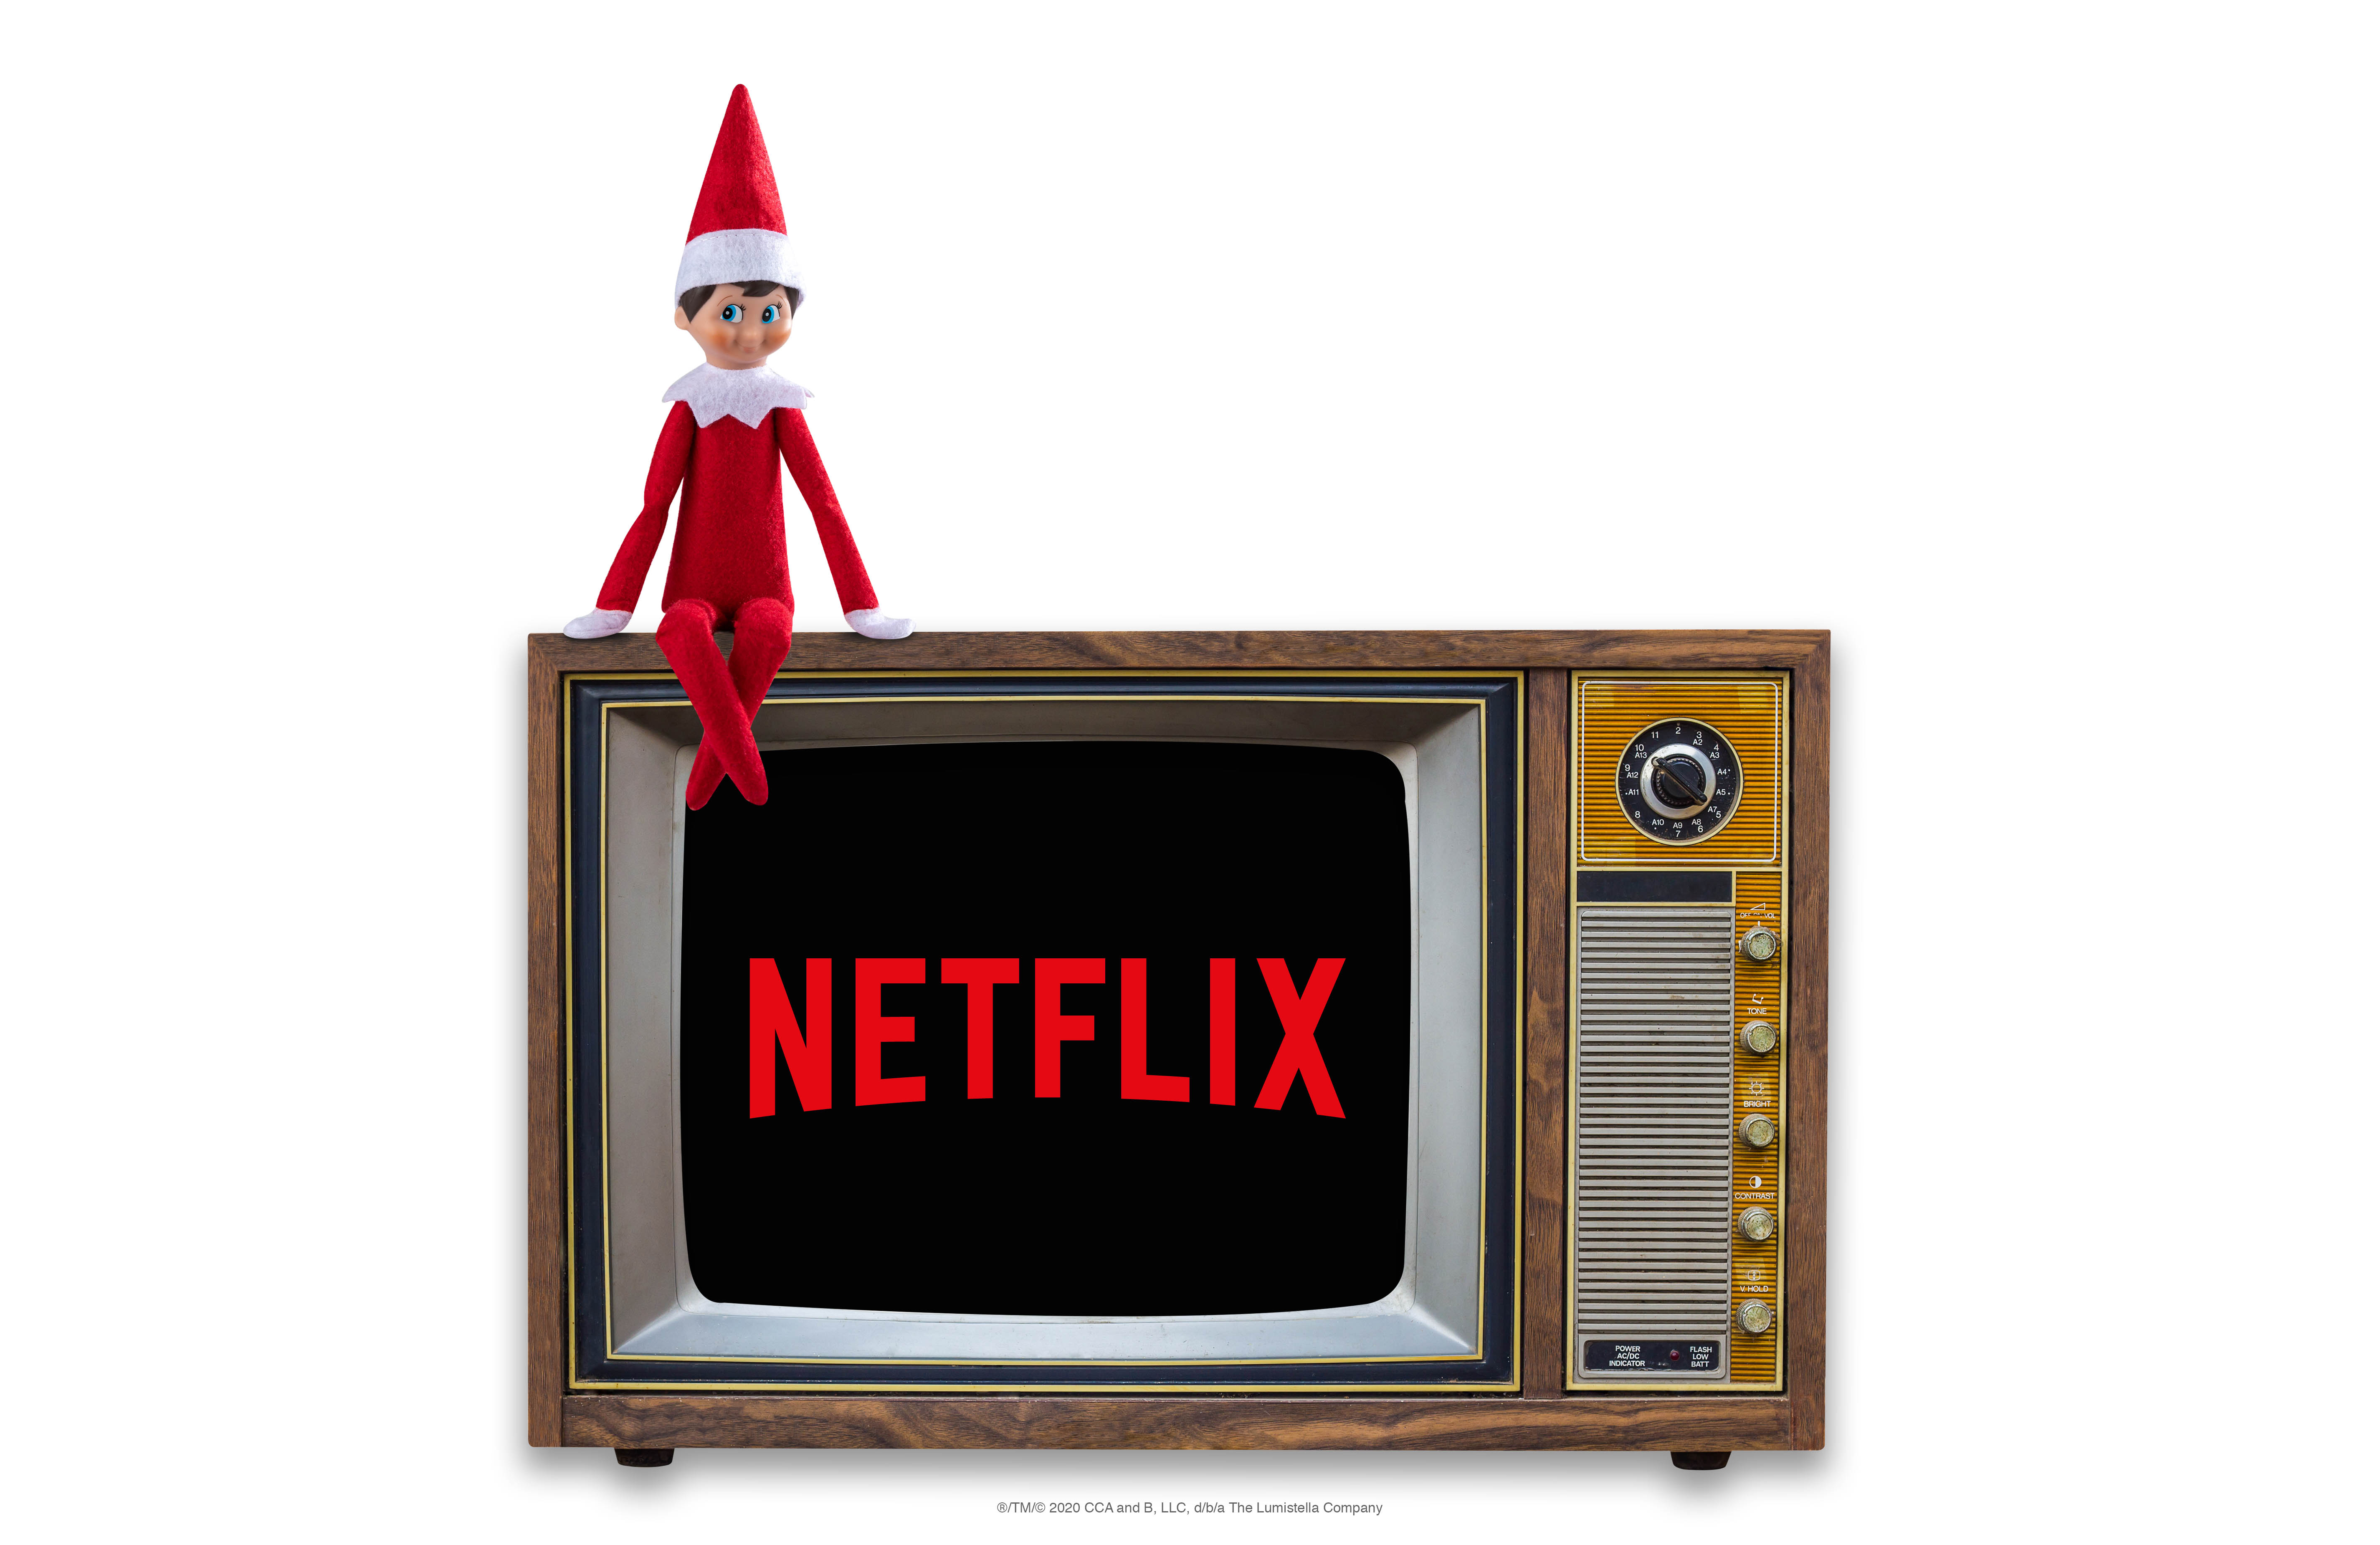 About Netflix 'The Elf on the Shelf' is coming to Netflix